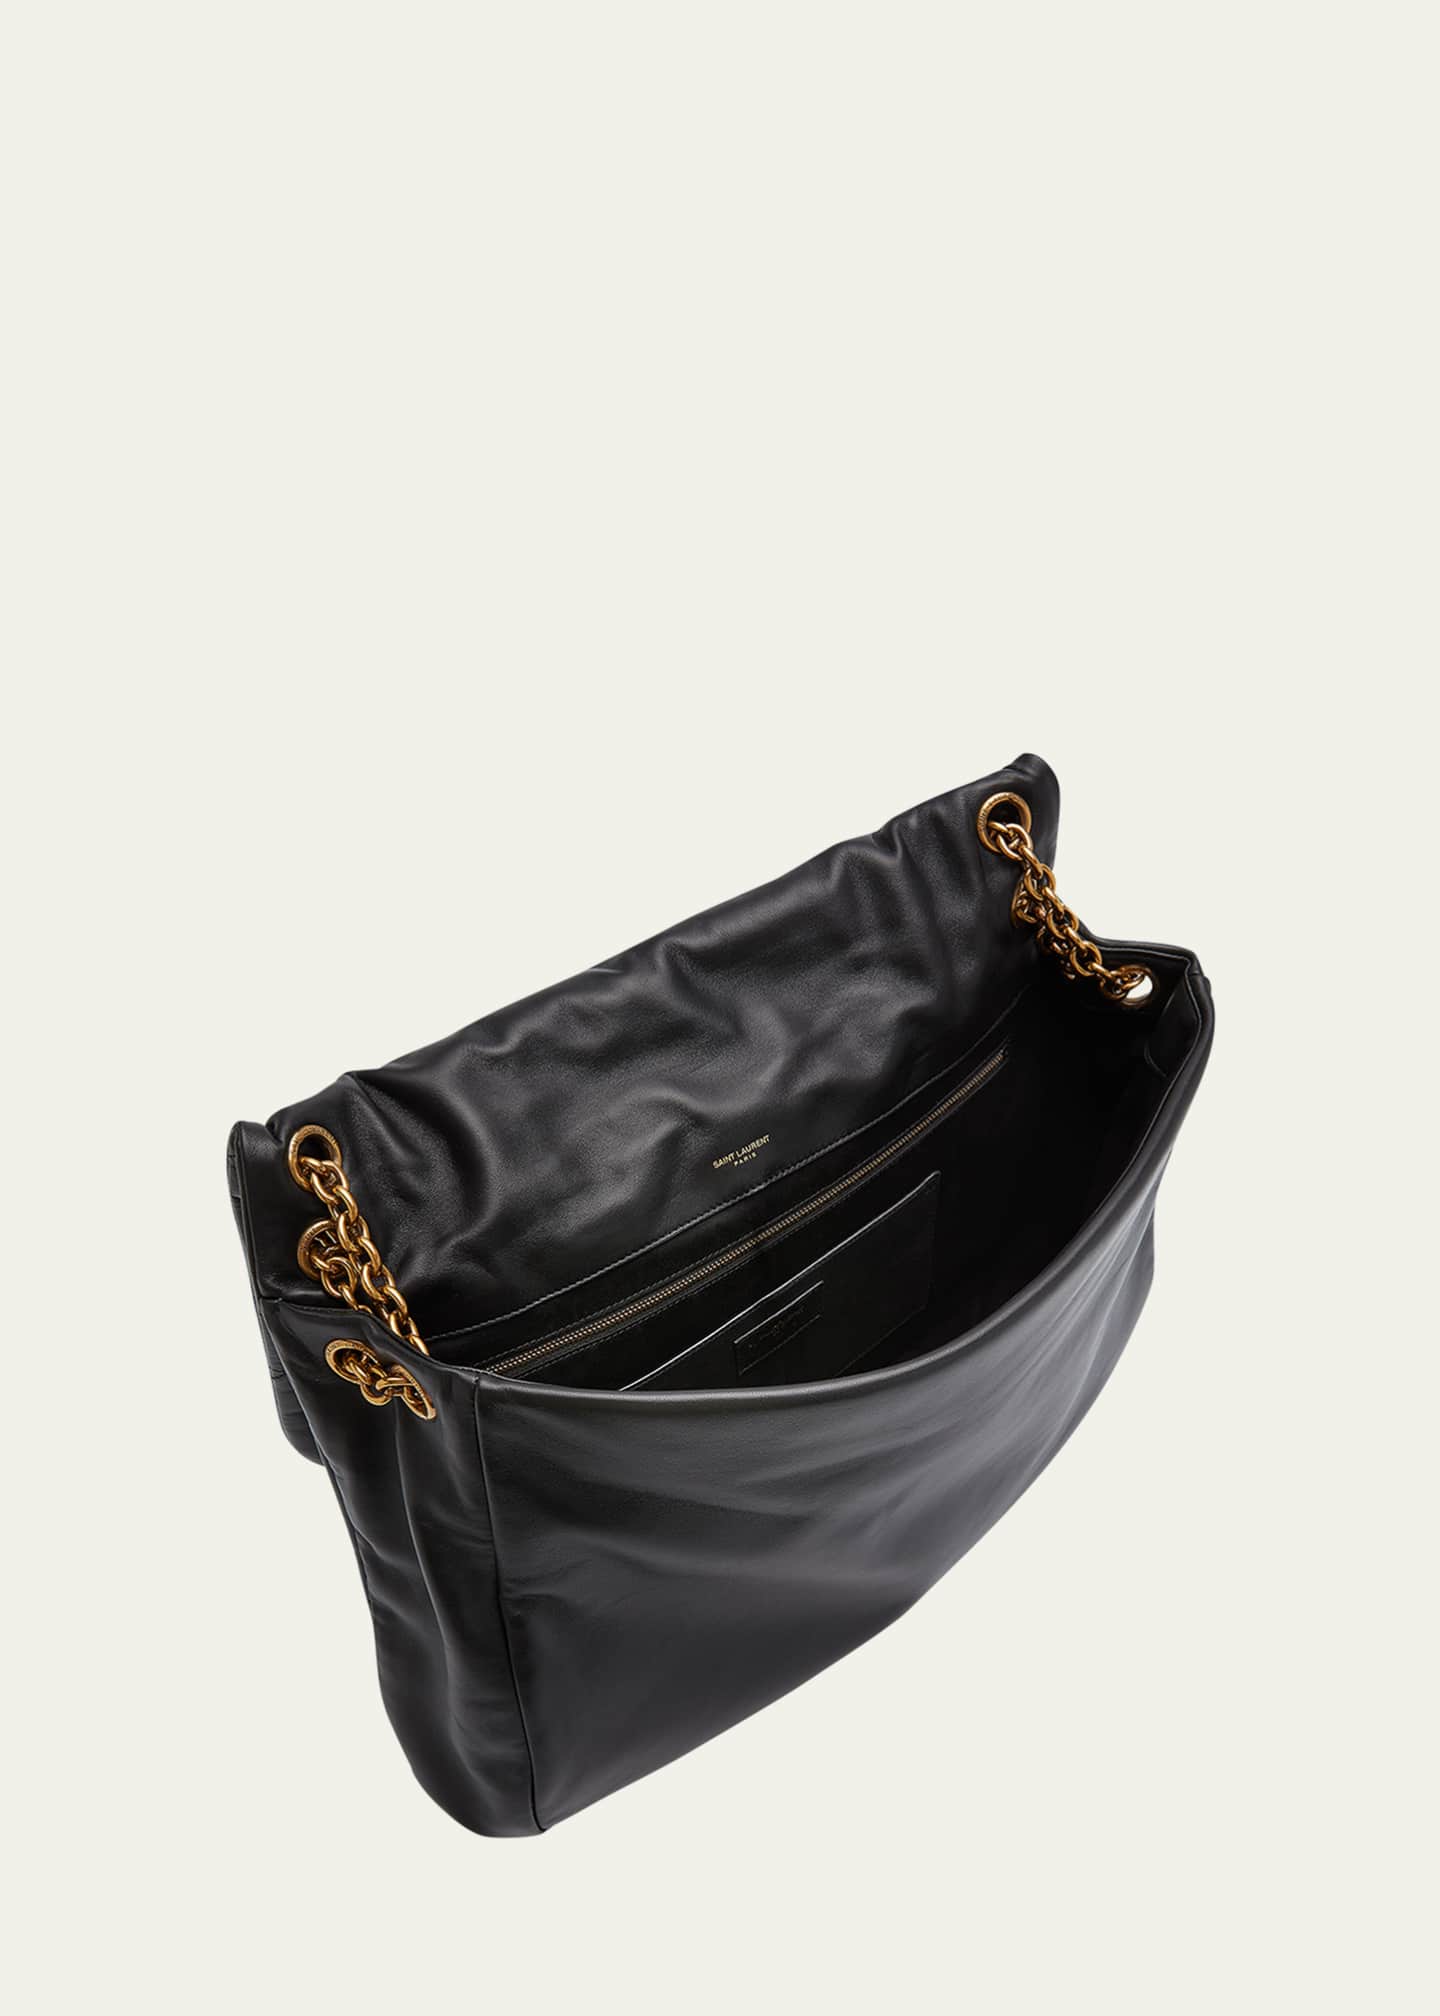 YSL BLACK COSMETIC BAG WITH GOLD COLOR LOGO